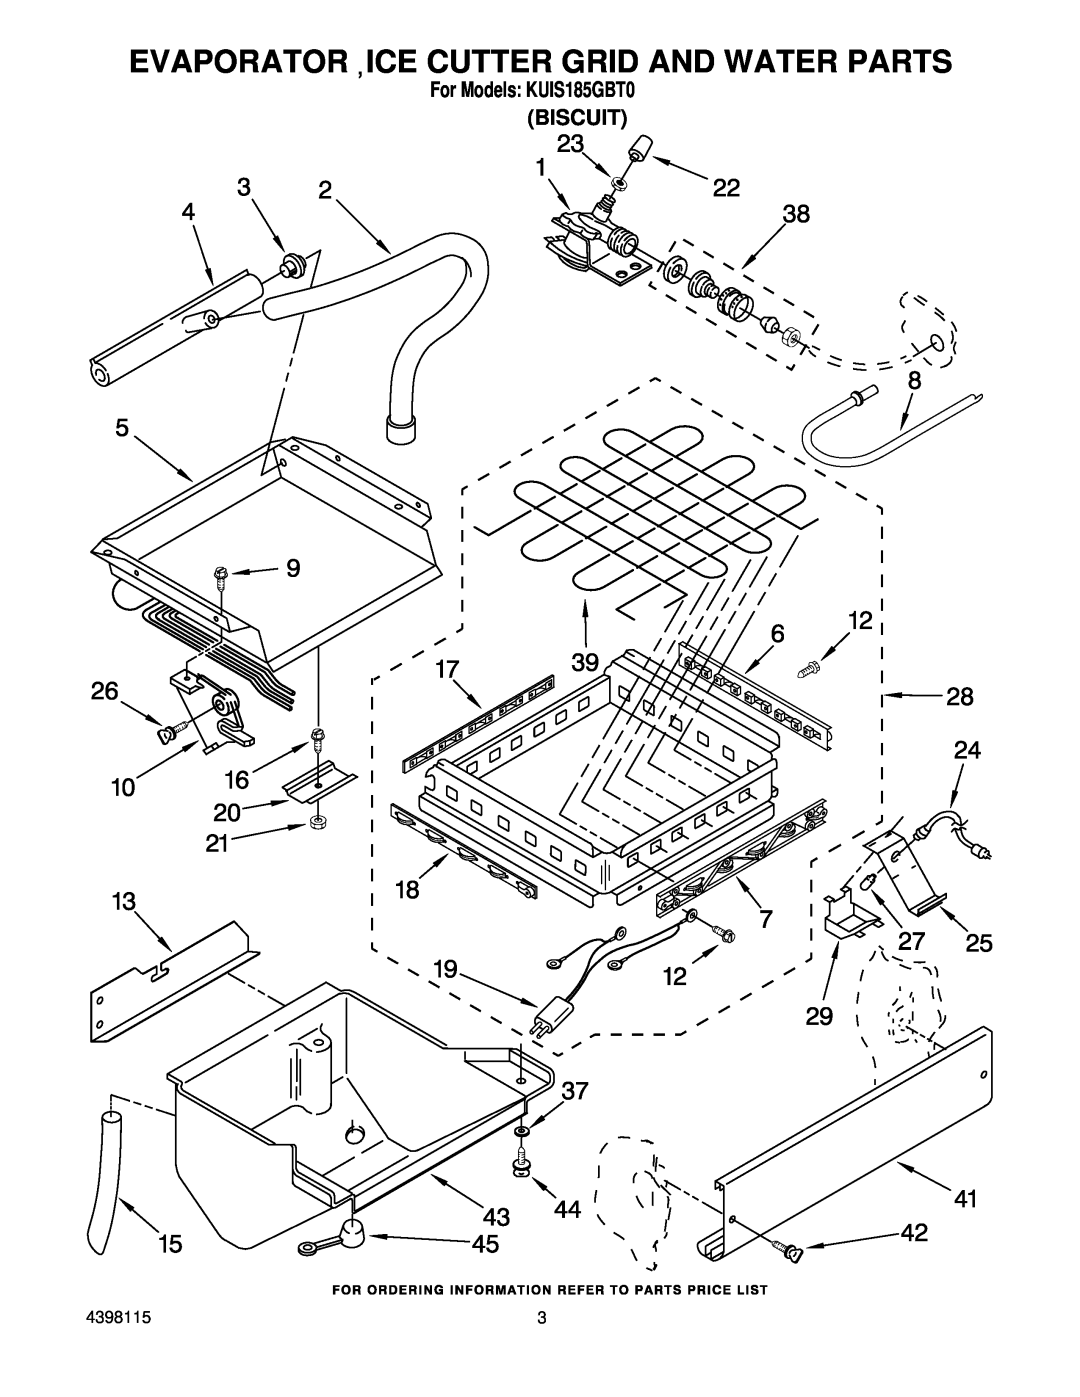 KitchenAid manual Evaporator Ice Cutter Grid And Water Parts, For Models KUIS185GBT0 BISCUIT 